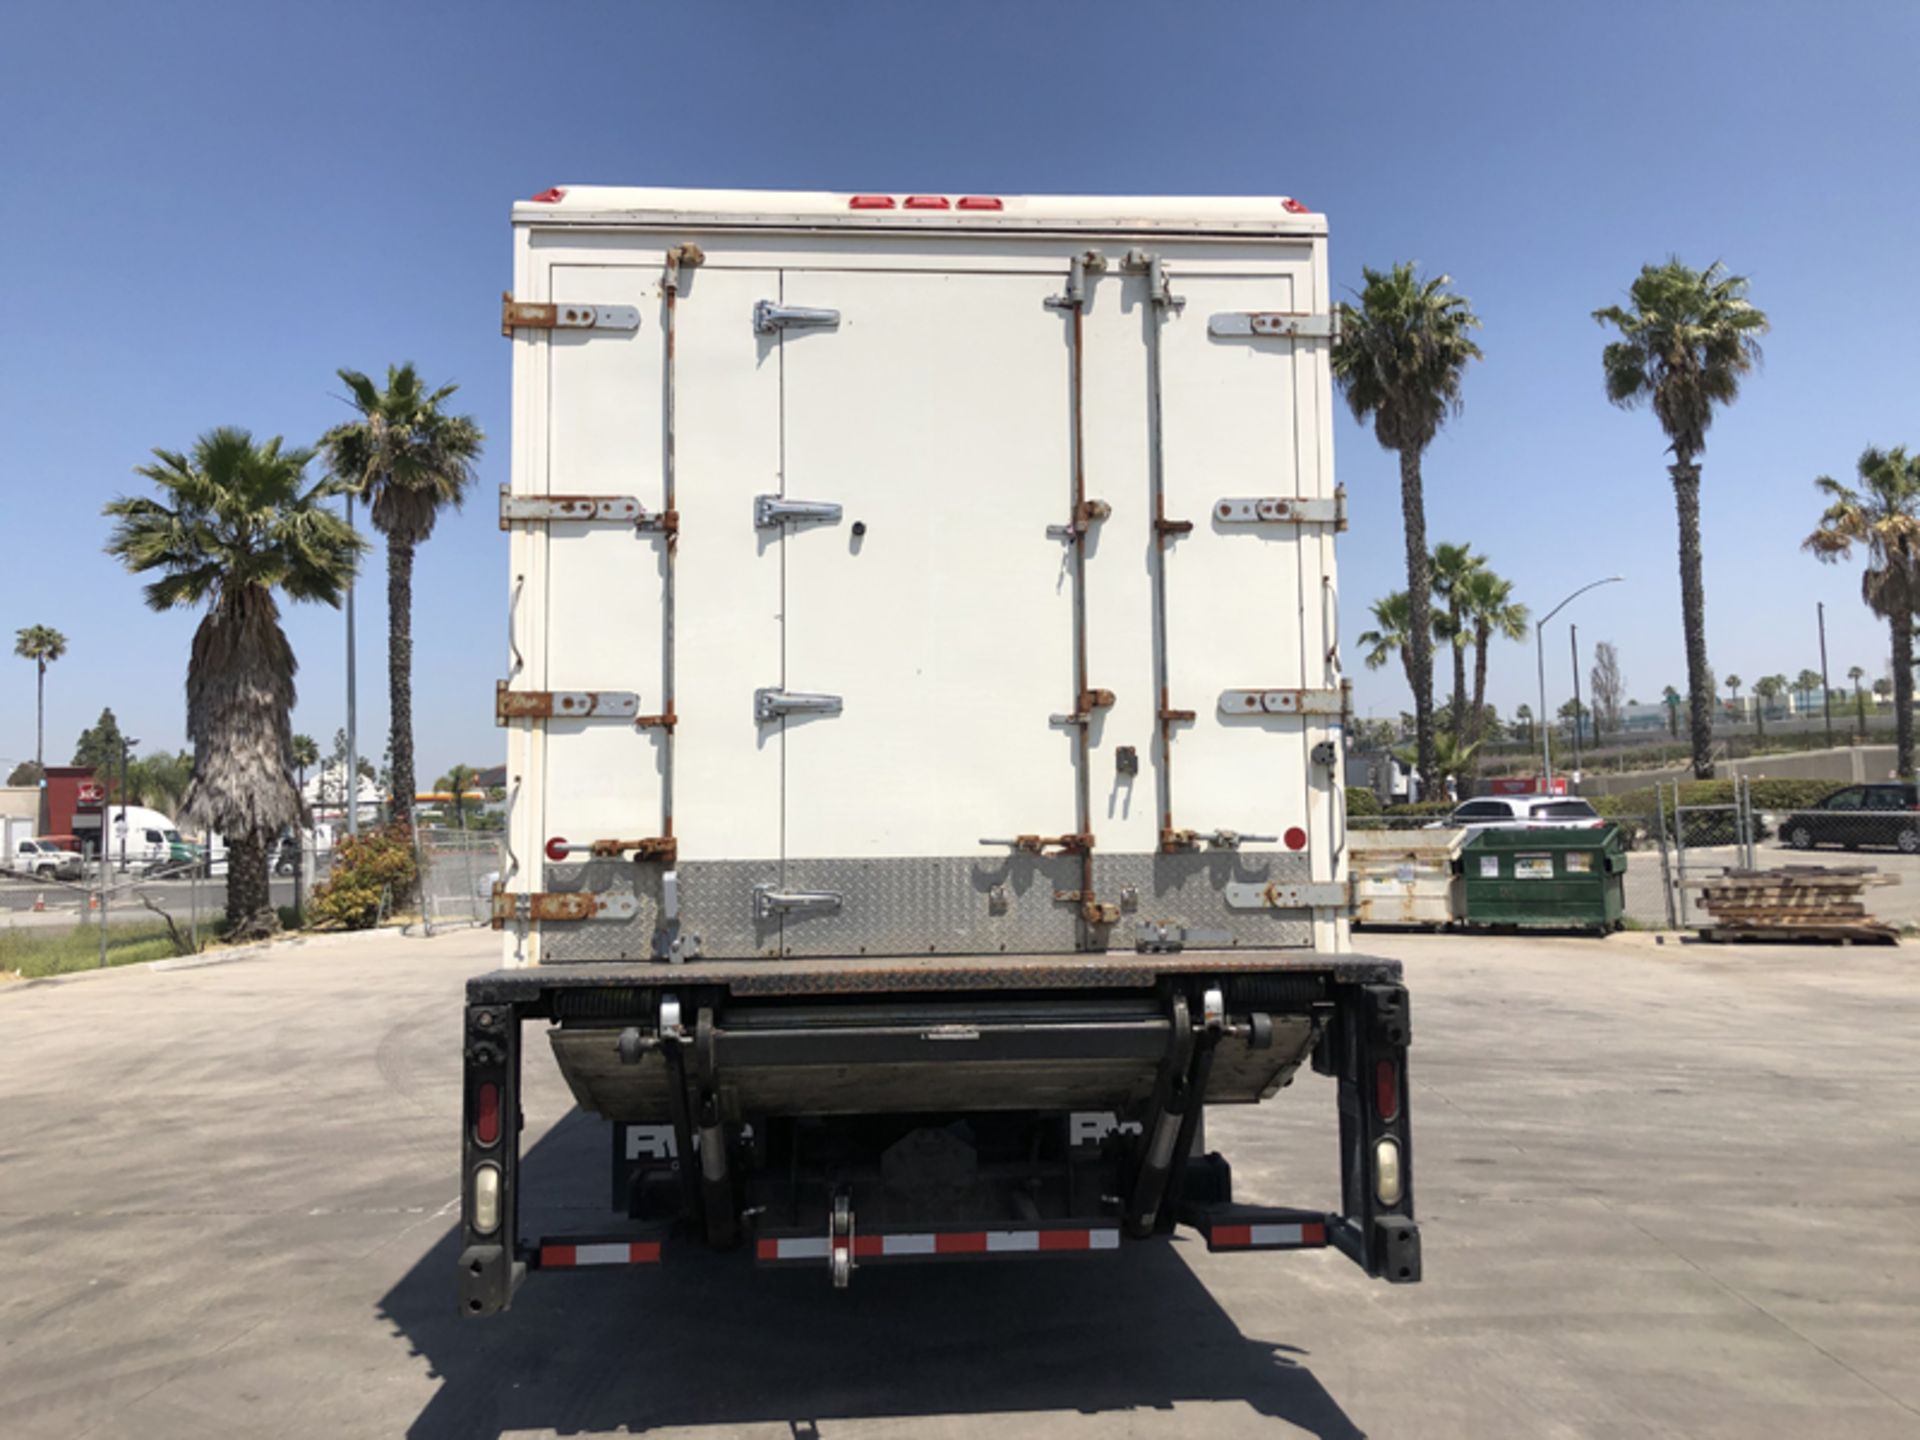 2018 INTERNATIONAL 4400 SBA 6X4 REFRIGERATED BOX TRUCK VIN#: 1HTMSTAR3JH529796, Approx Miles: 42517, - Image 5 of 9